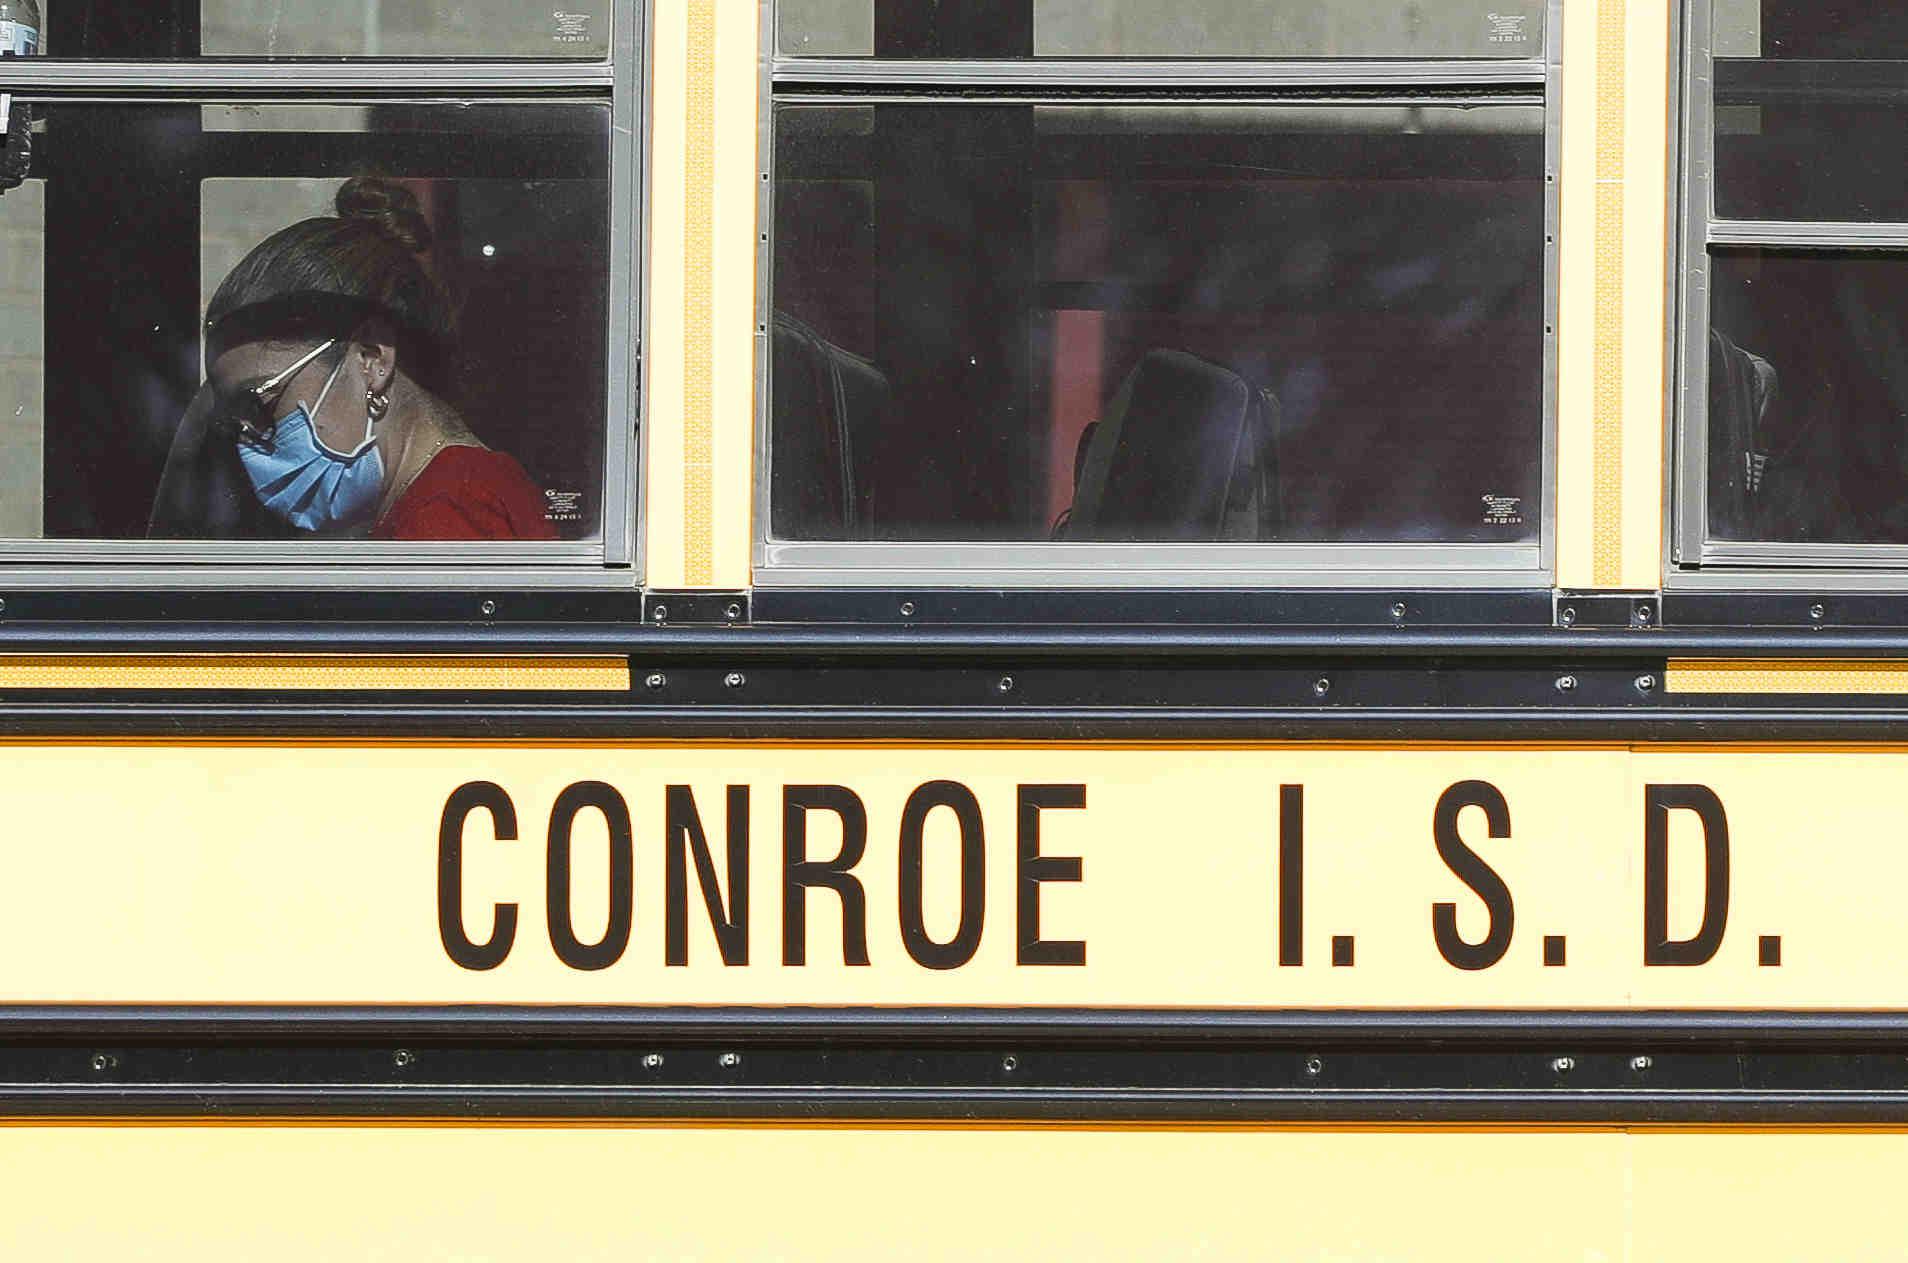 Conroe Isd 2022 Calendar Conroe Isd Approves Its 2022-23 School Calendar With Aug. 10 Start Date